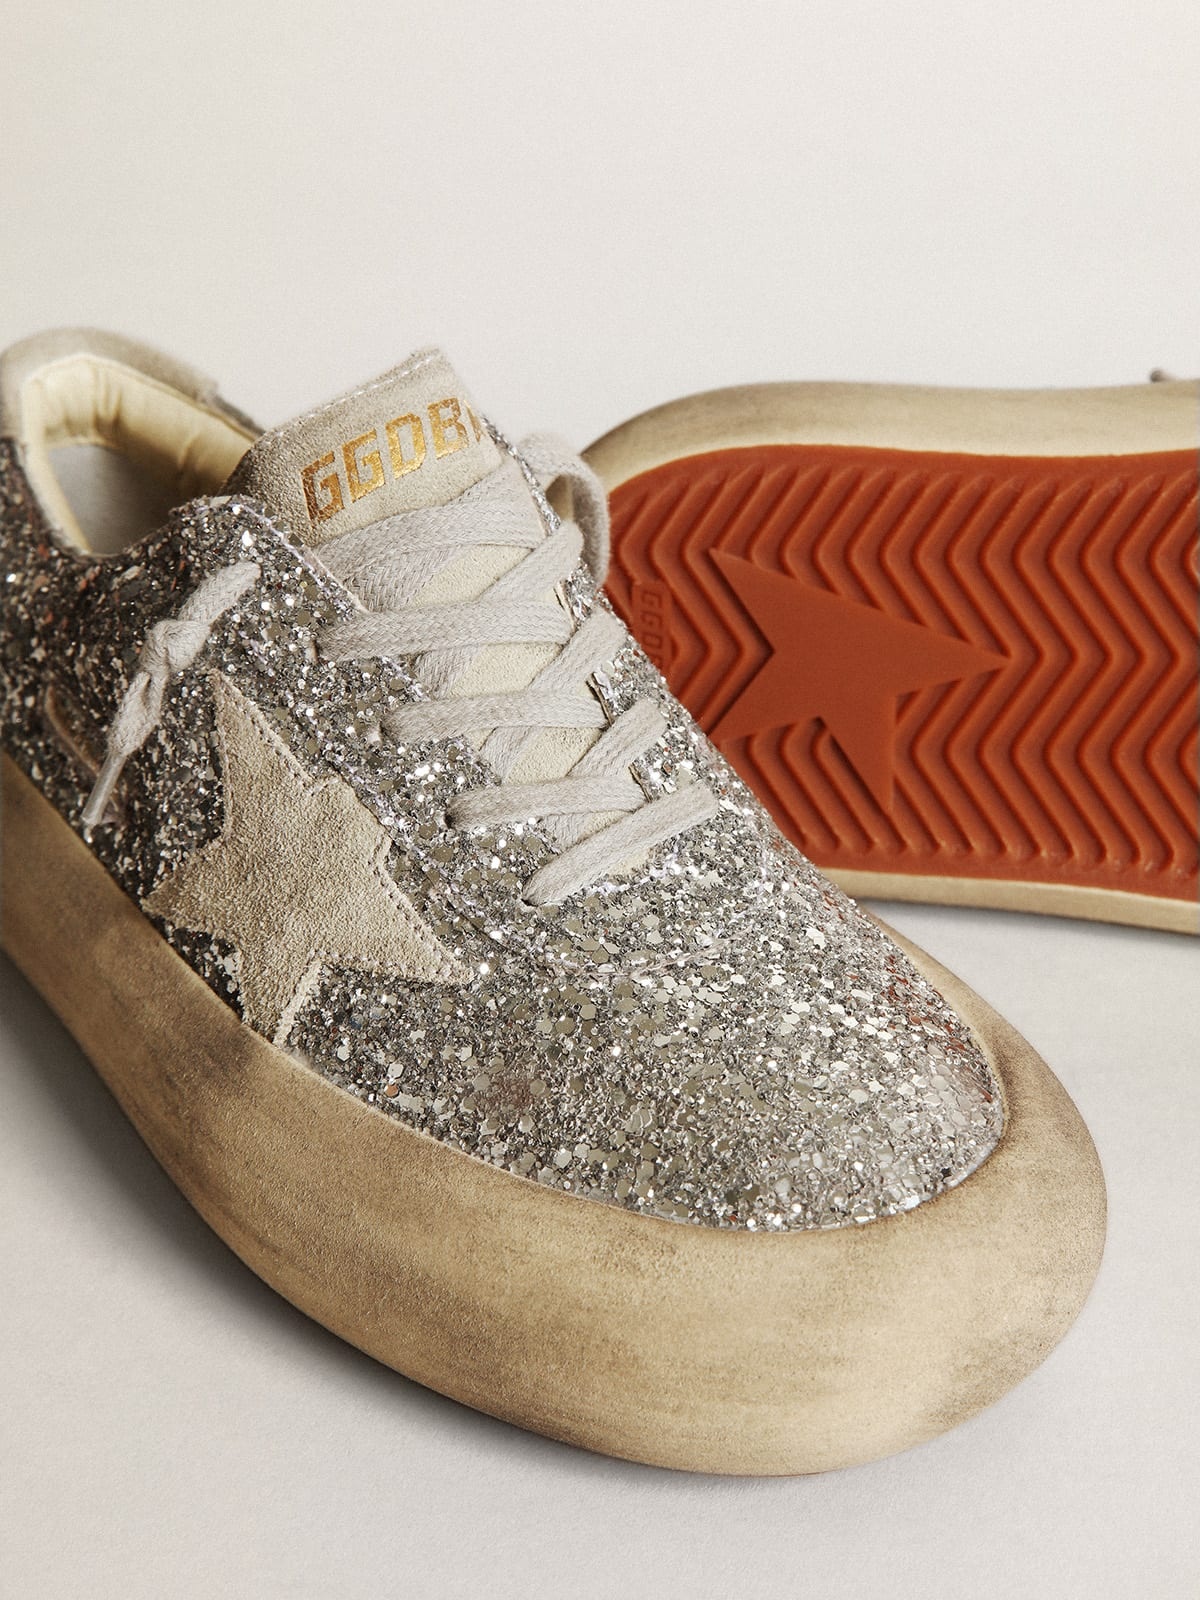 Space-Star shoes in silver glitter with ice-gray suede star and heel tab - 4